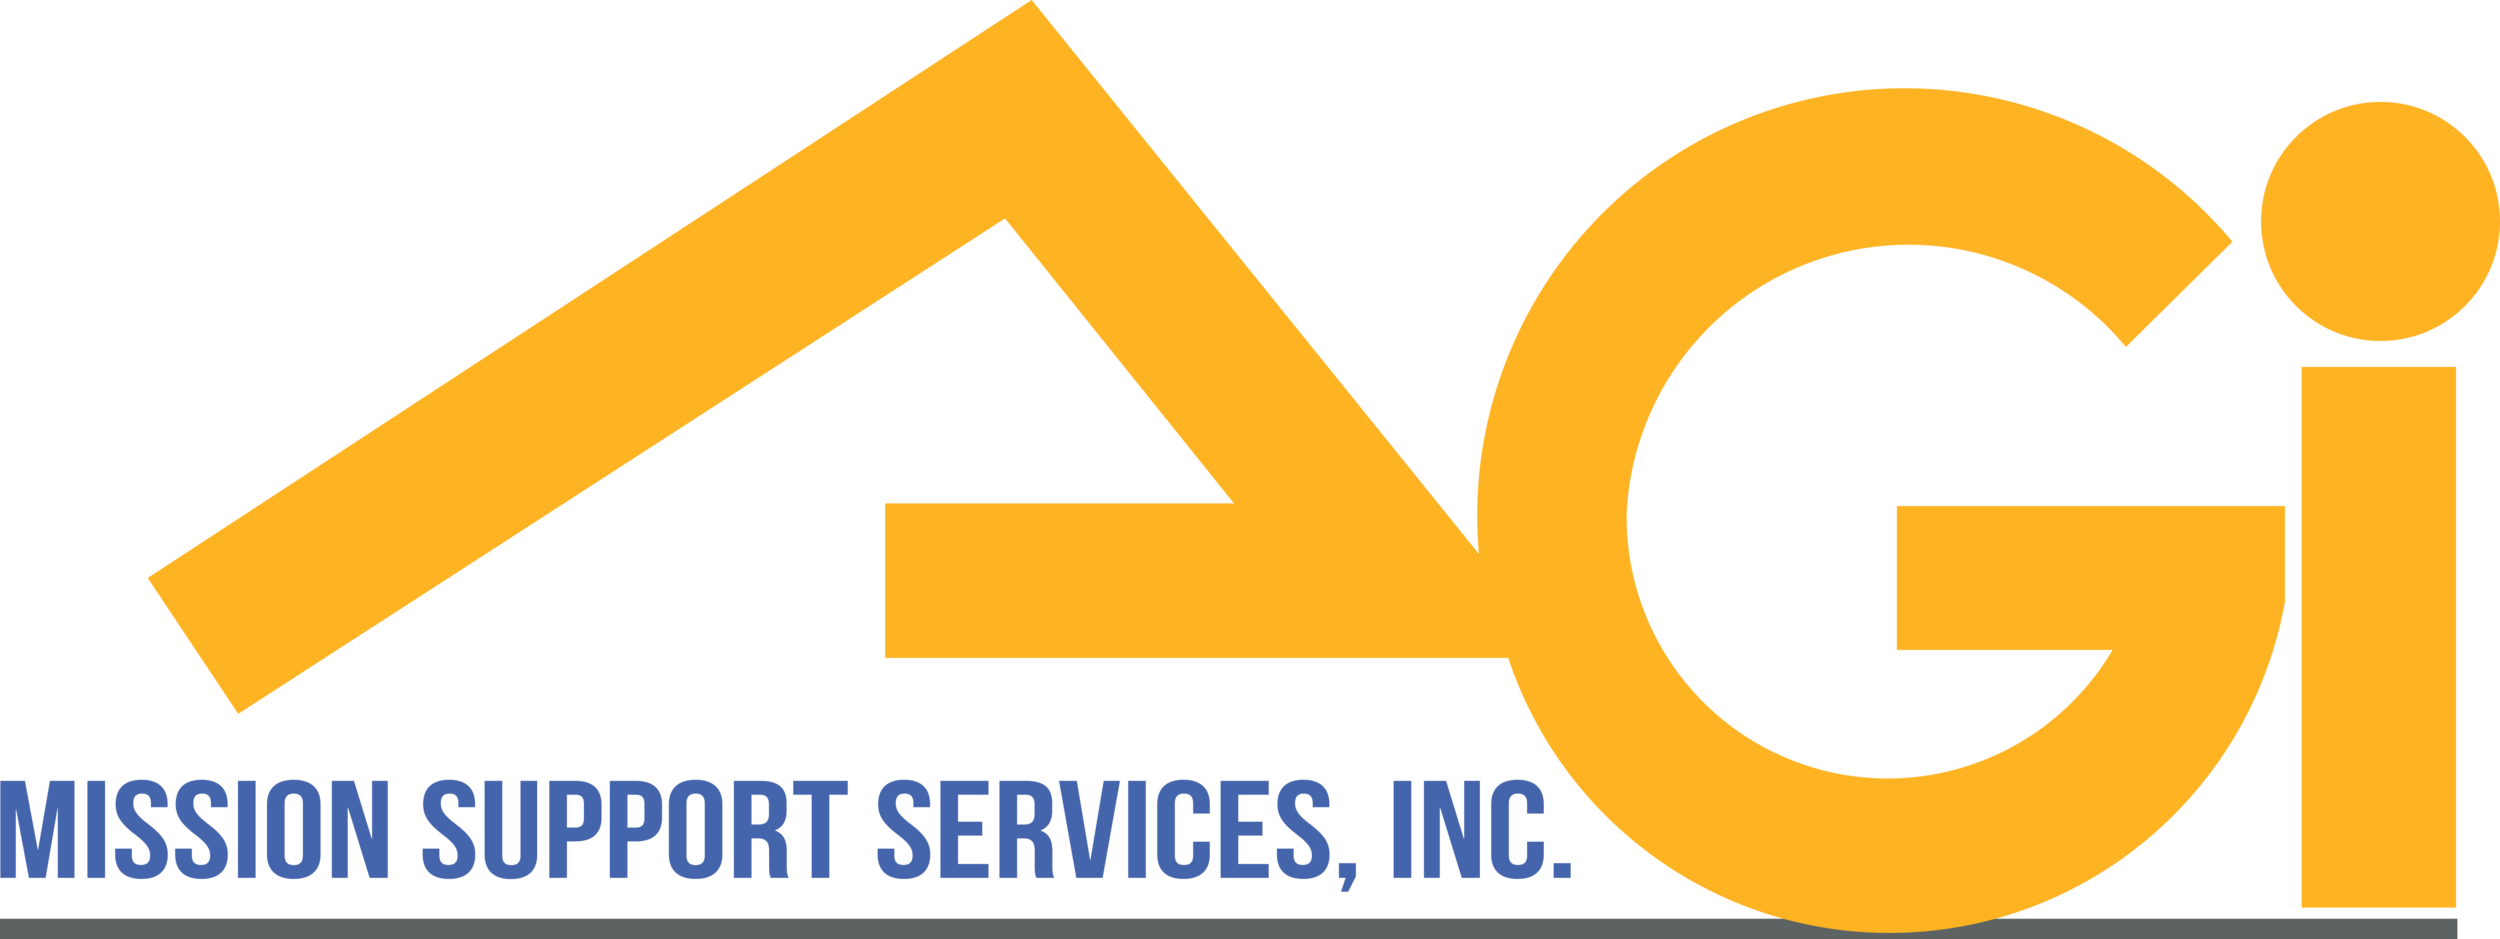 AGi Mission Support Services, Inc. 